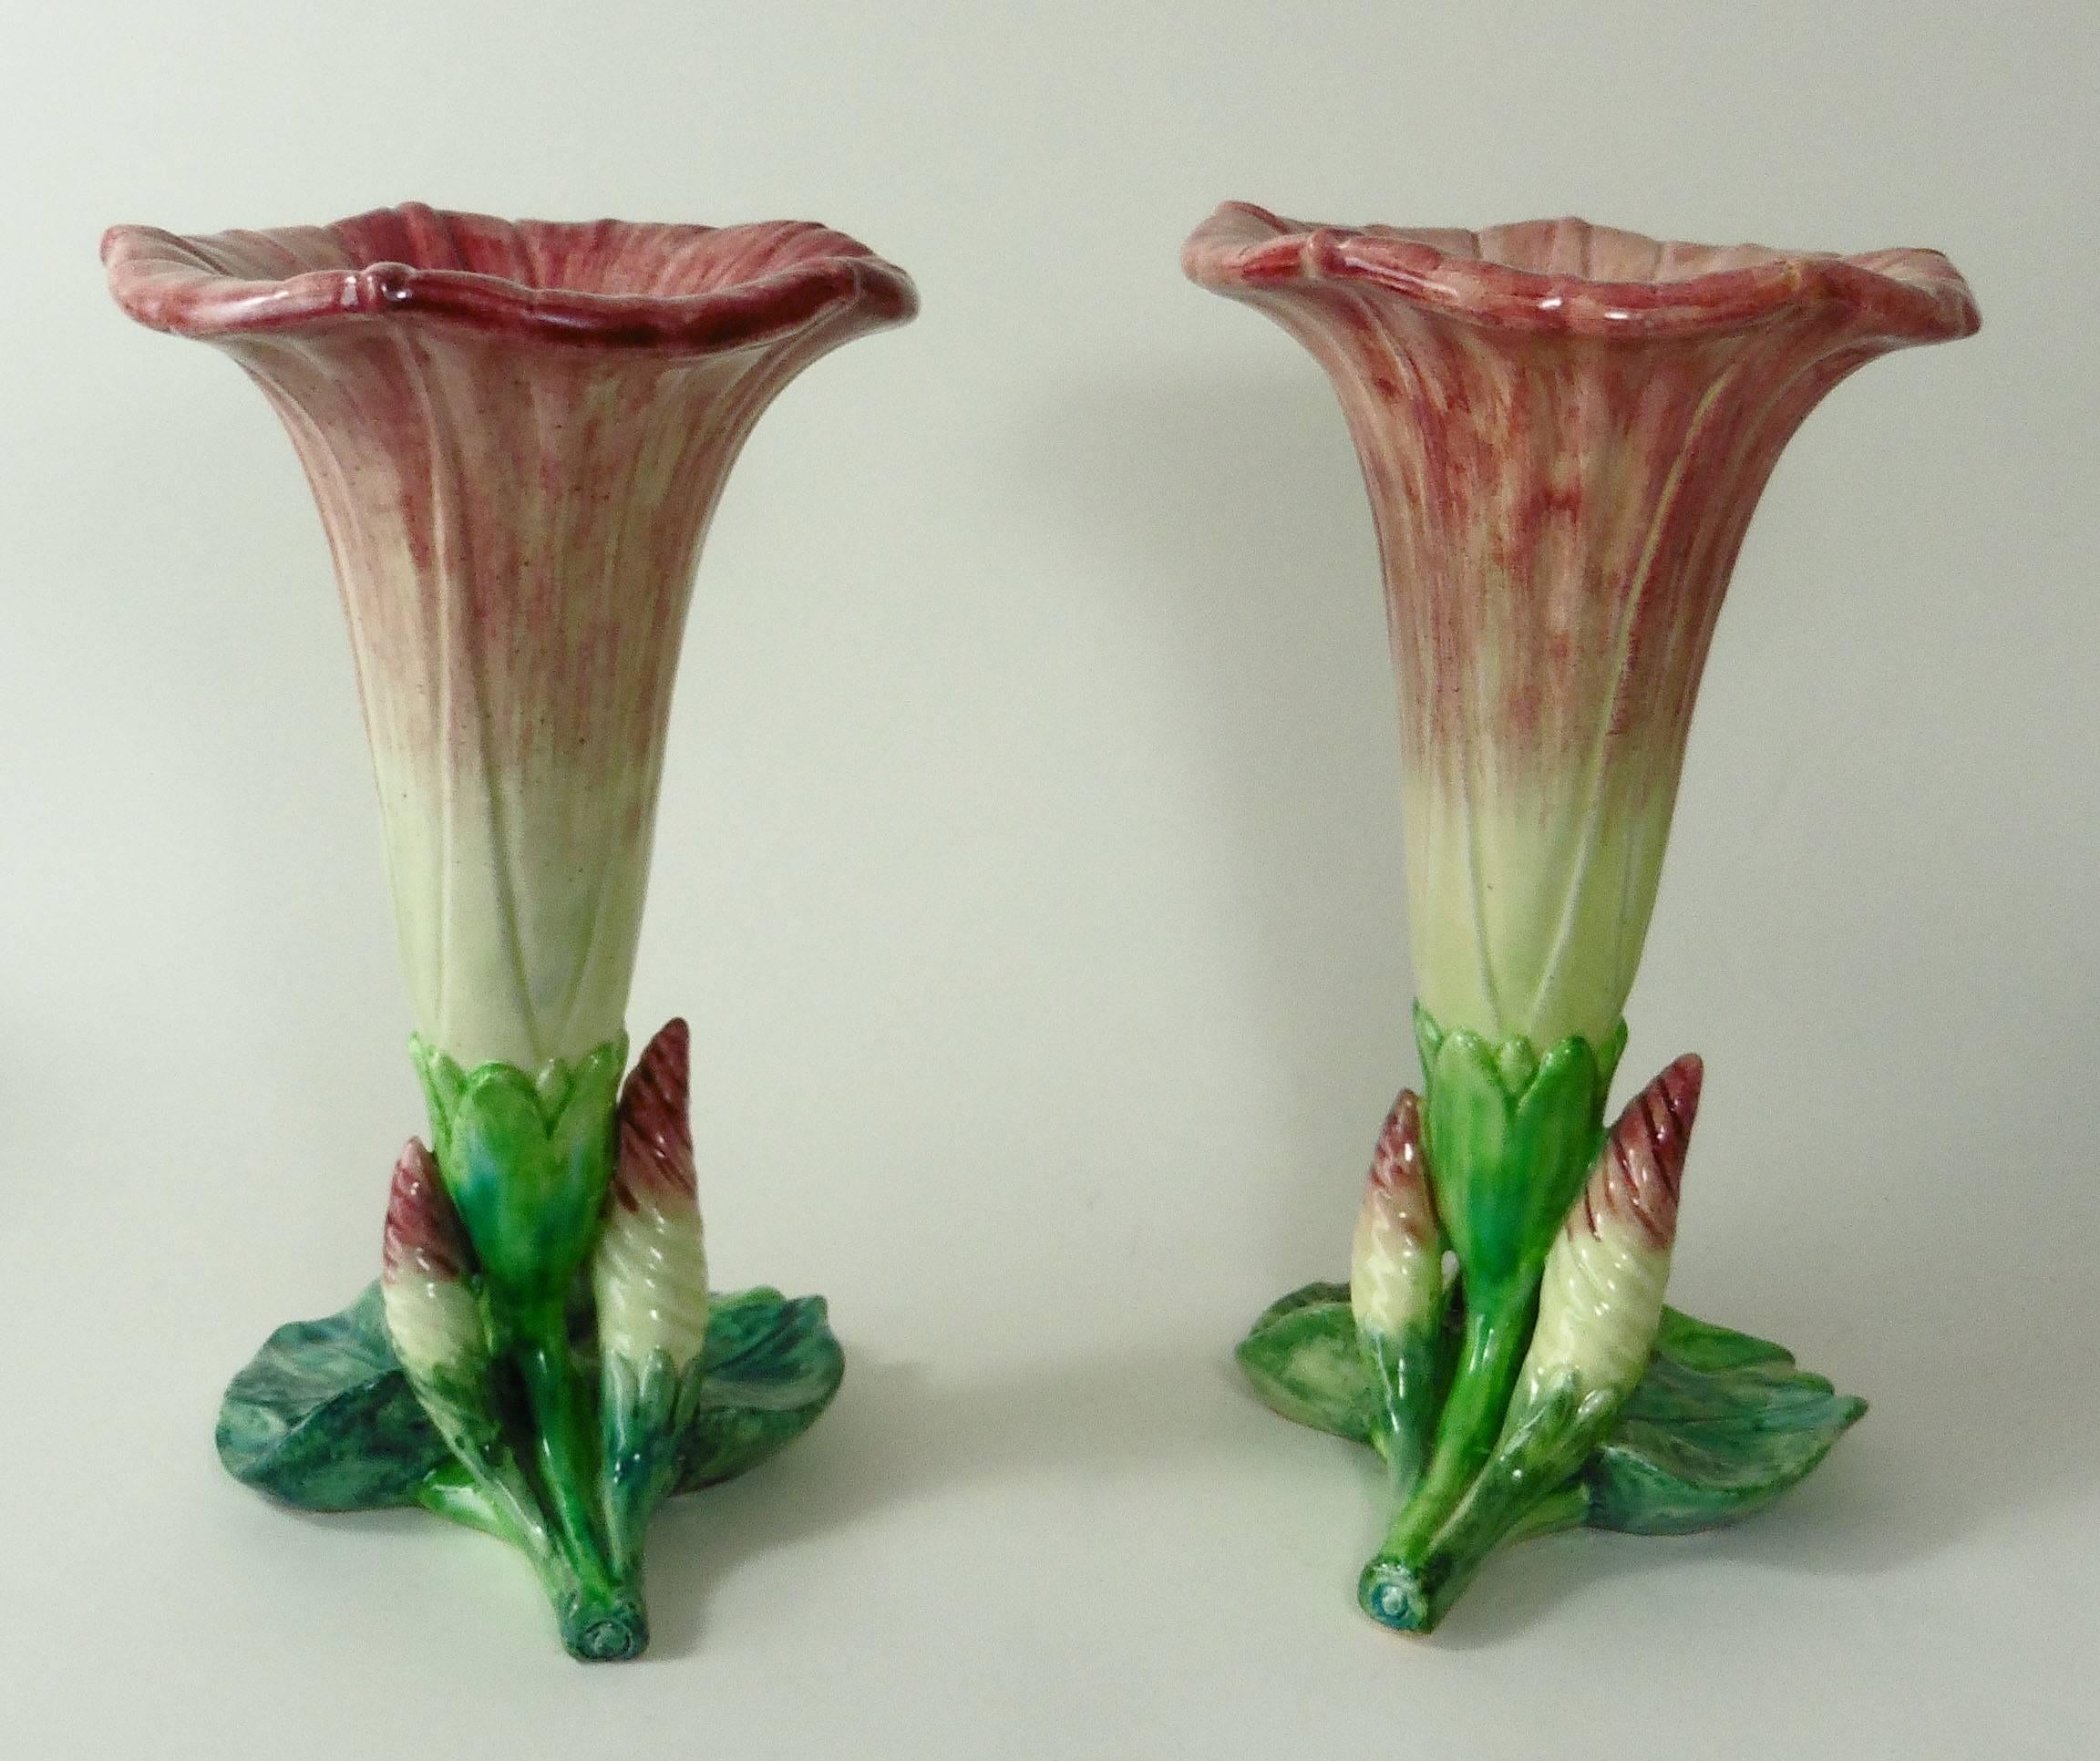 Pair of large Majolica pink morning glory attributed to Delphin Massier, circa 1890.
The Massier family are known for the quality of their unique enamels and paintings. They produced an incredible whole range of flowers like iris, roses, daisies,